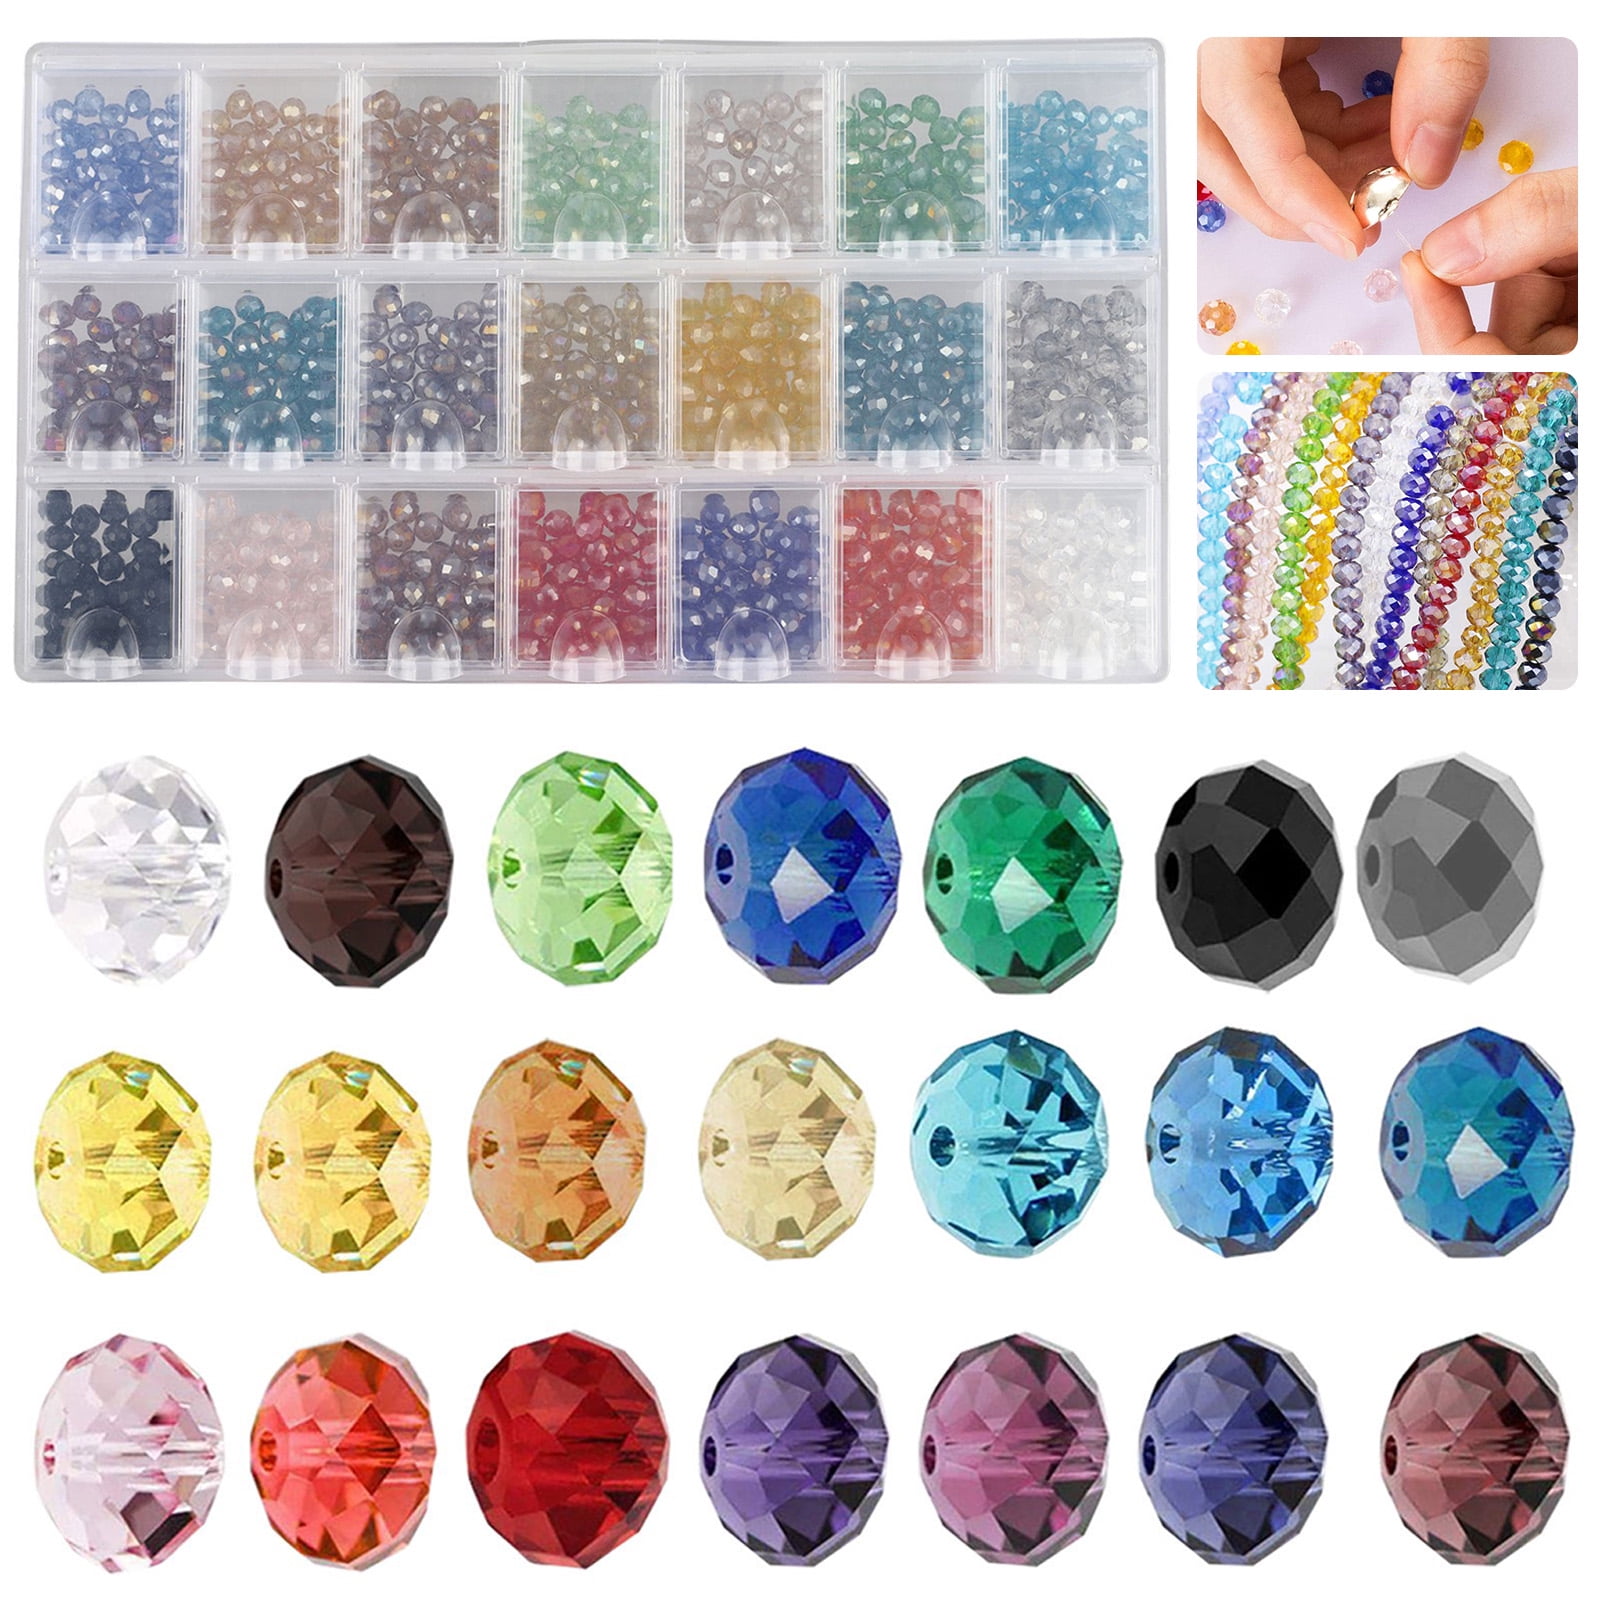 Wholesale Crystal Glass Round Loose Spacer Beads Findings 4mm 6mm 8mm 10mm 